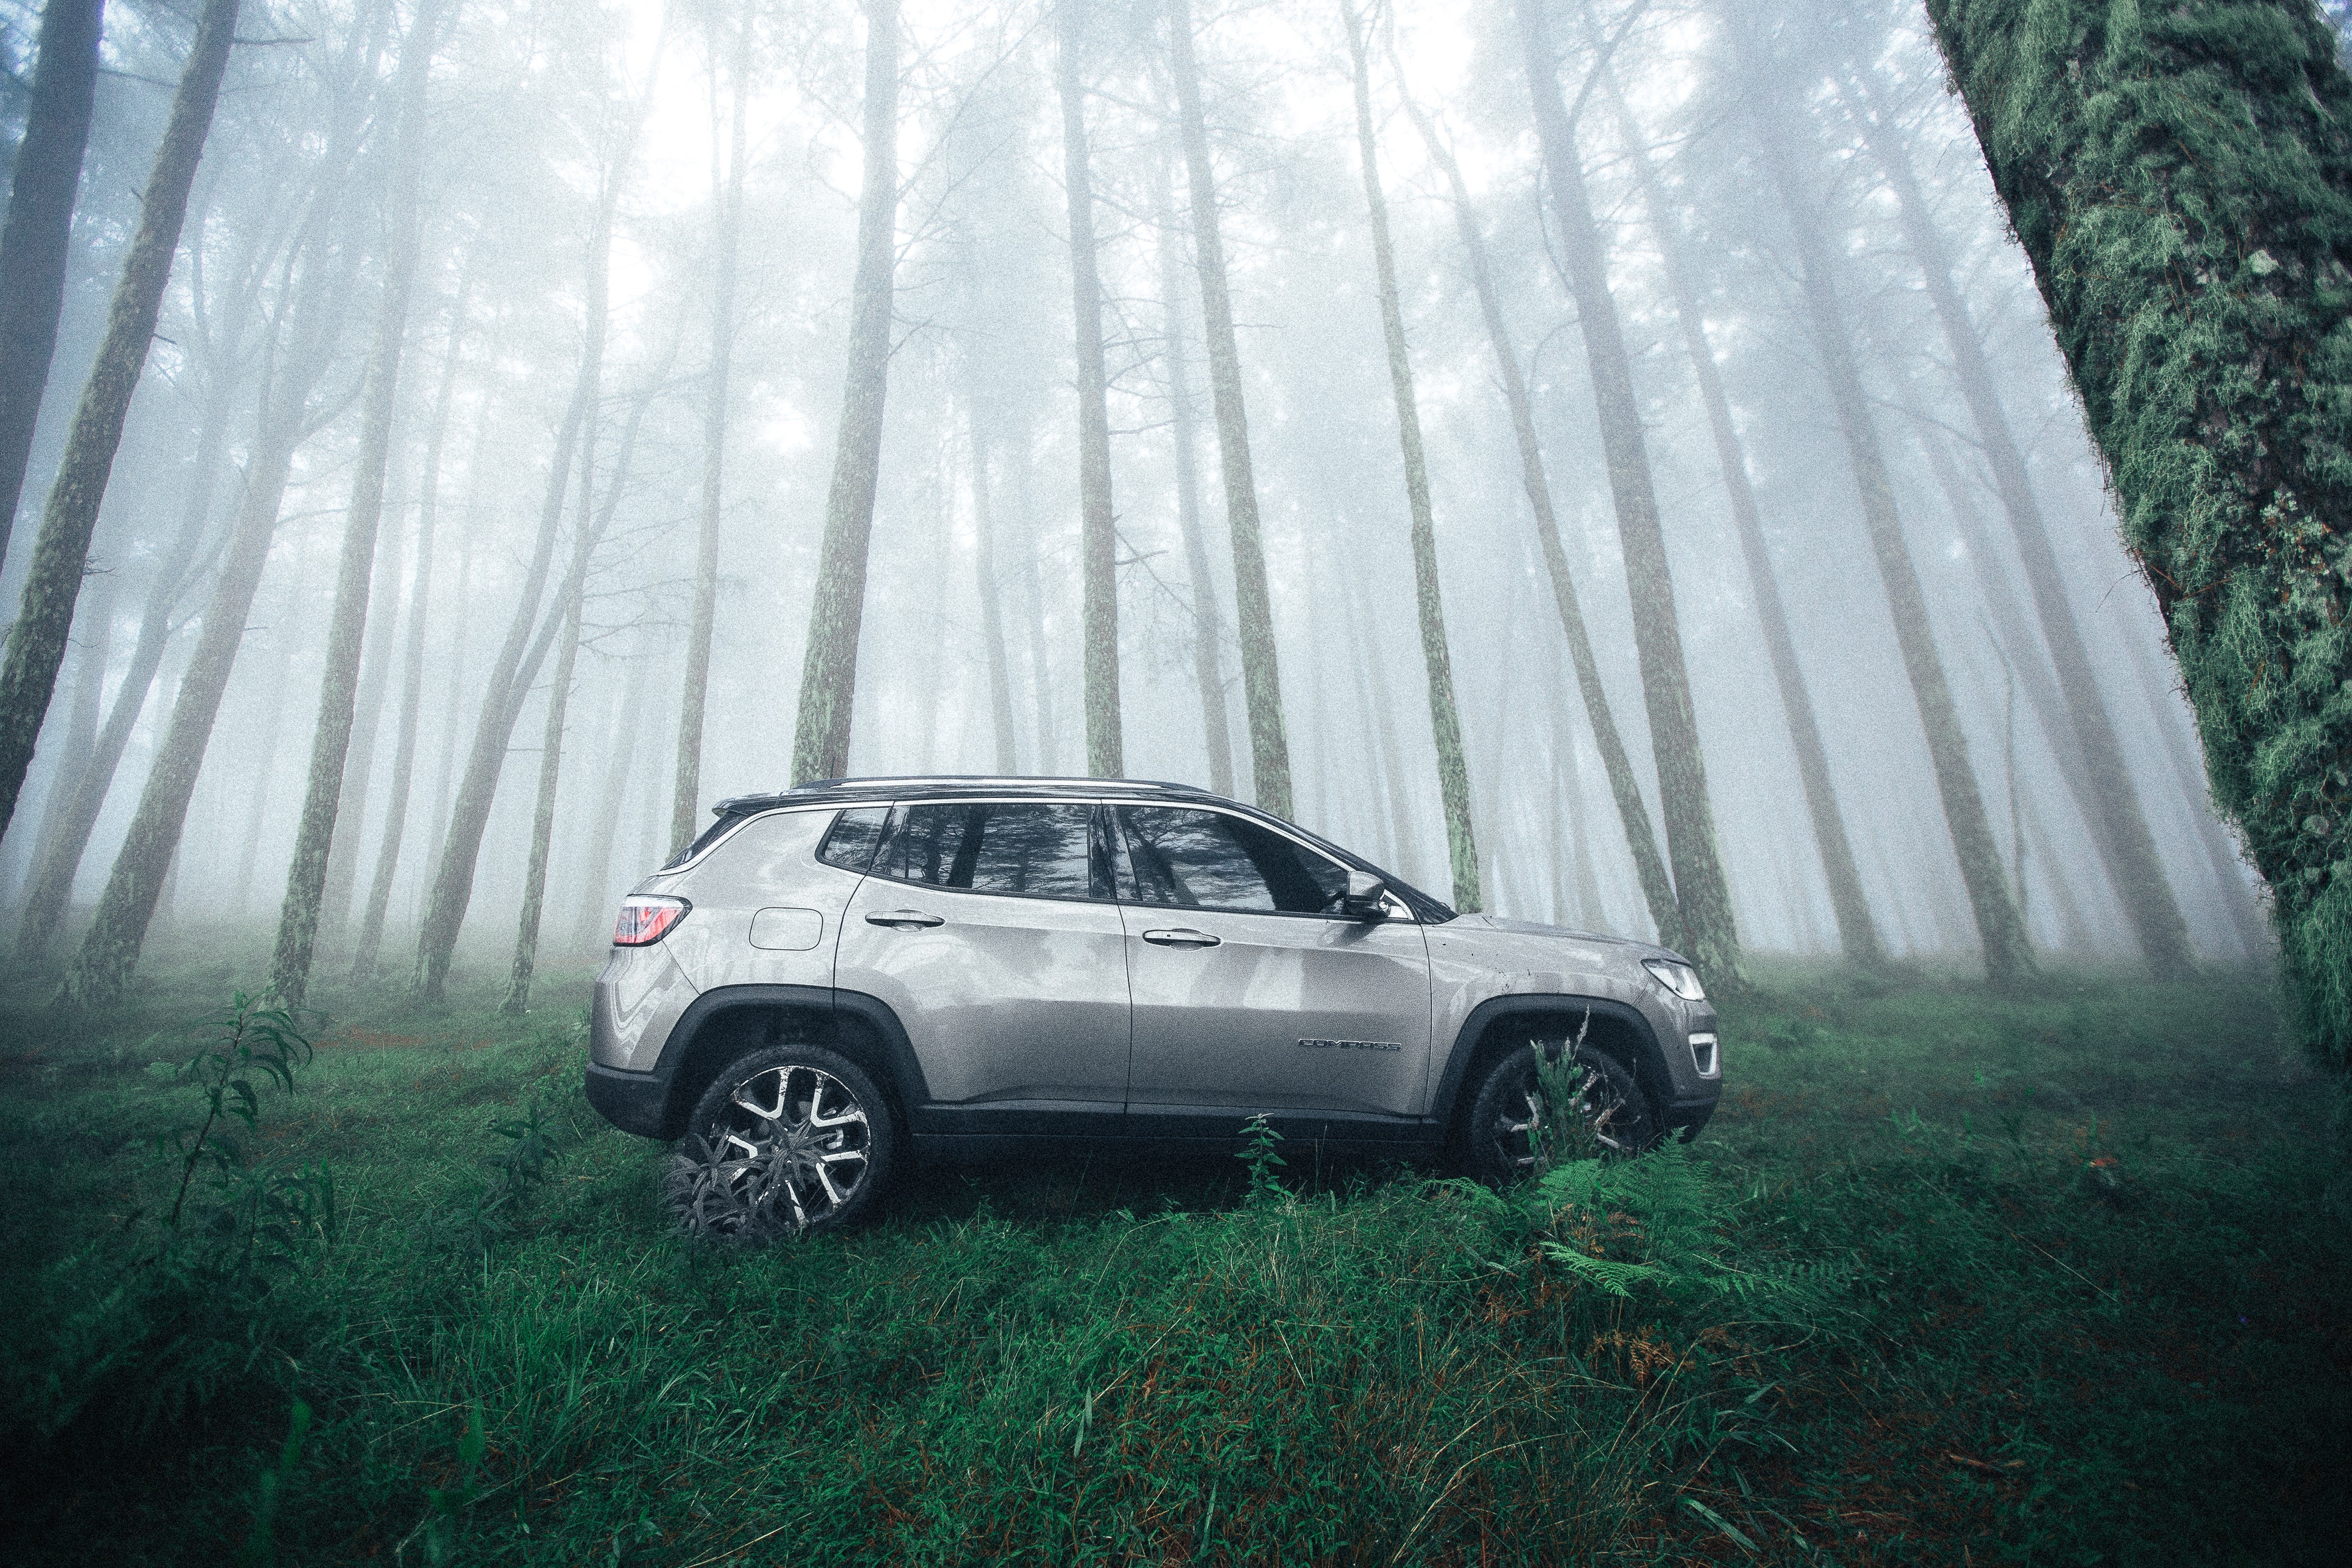 silver SUV parked in the misty woods